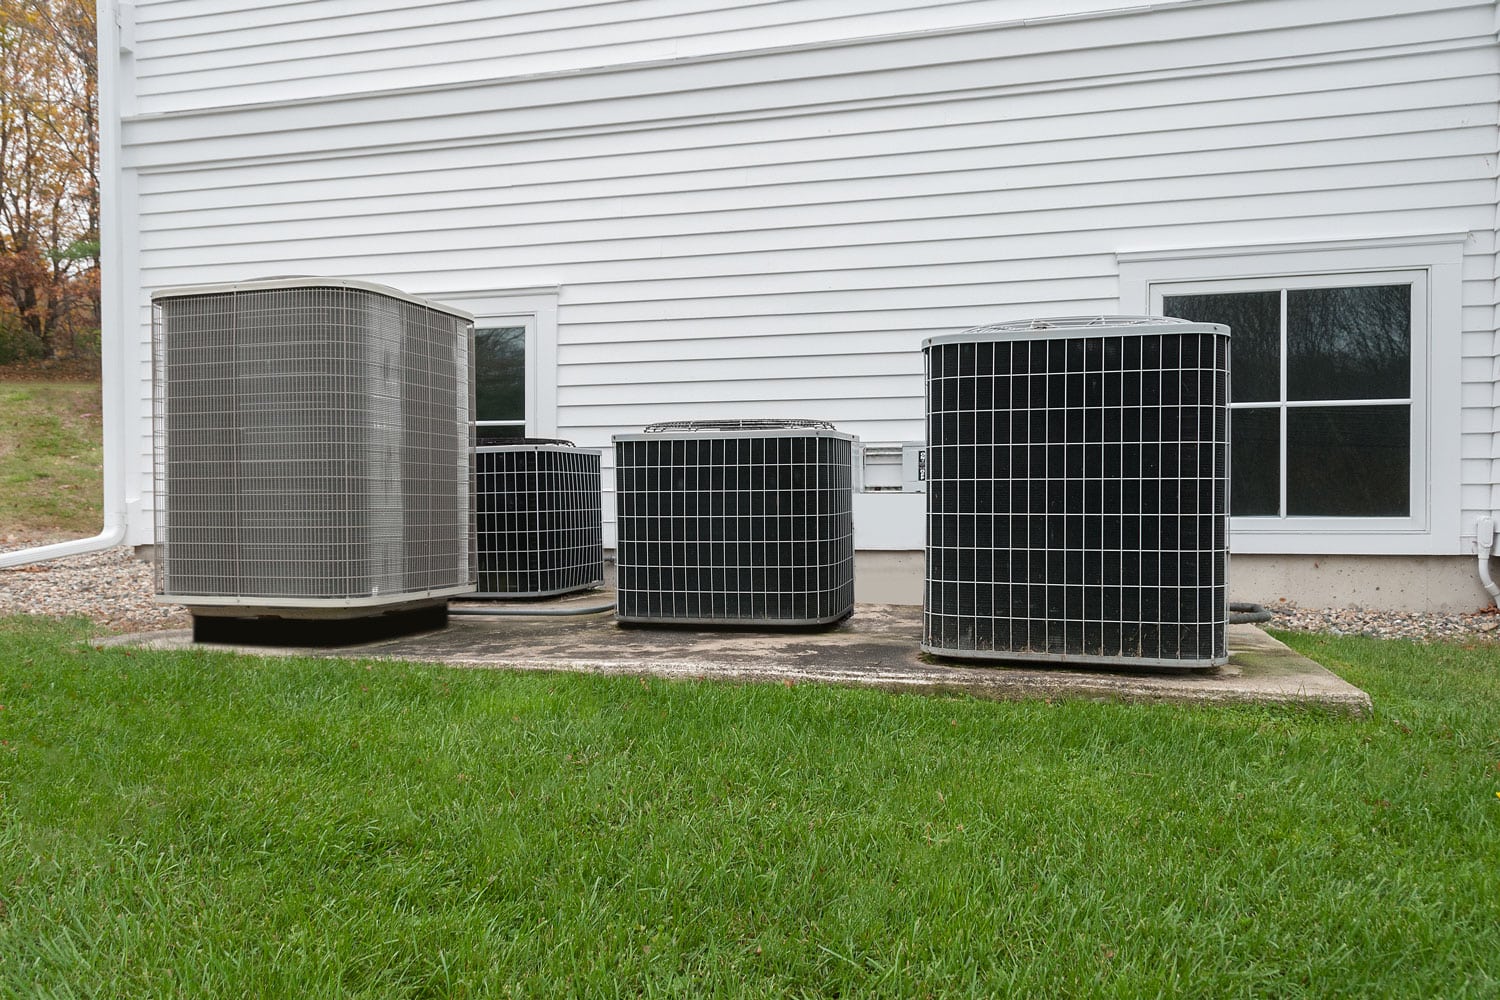 AC units mounted on a concrete slab behind the house